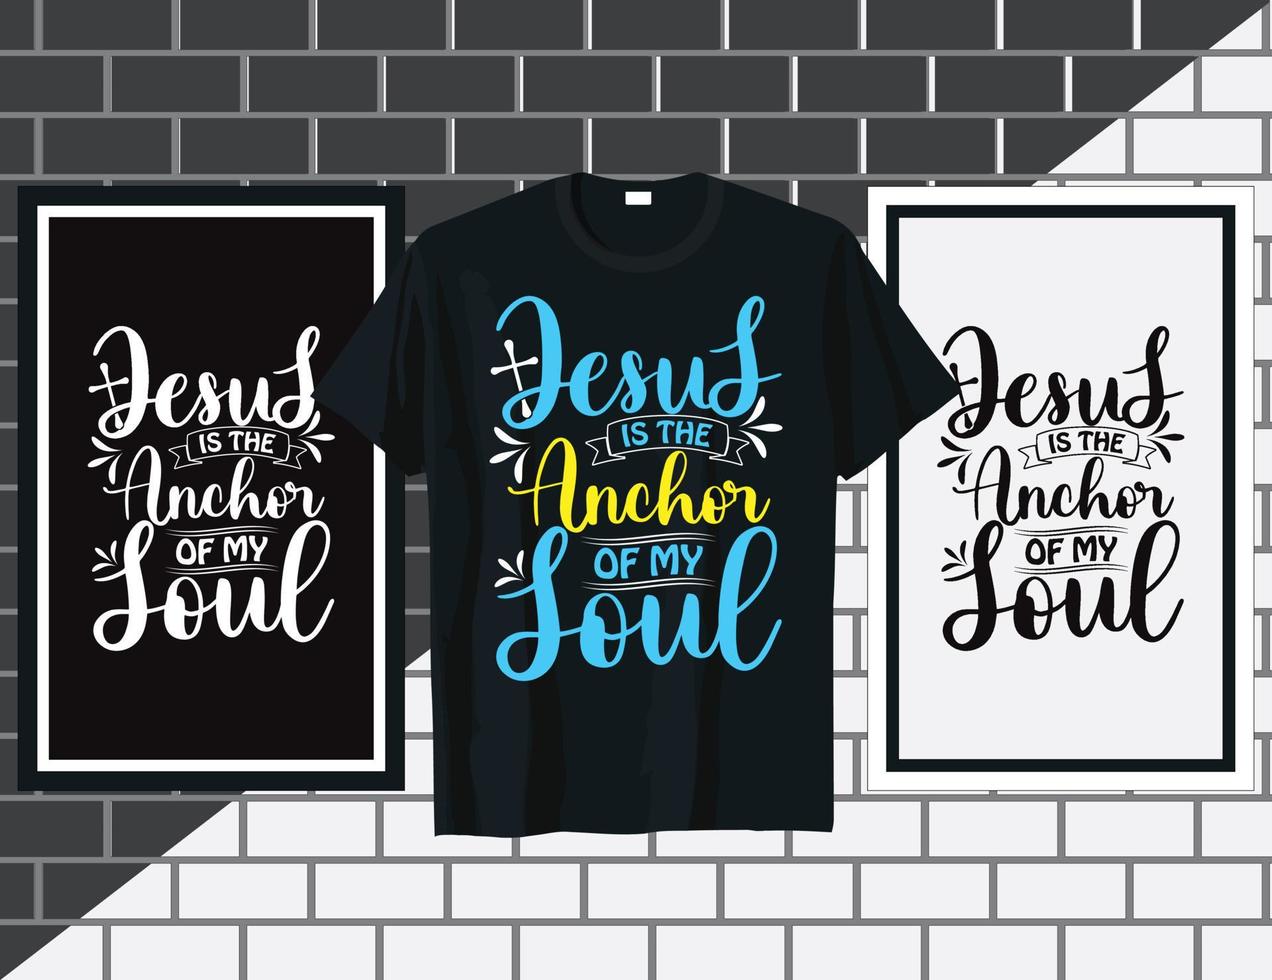 Jesus is the anchor Christian sayings t shirt design vector